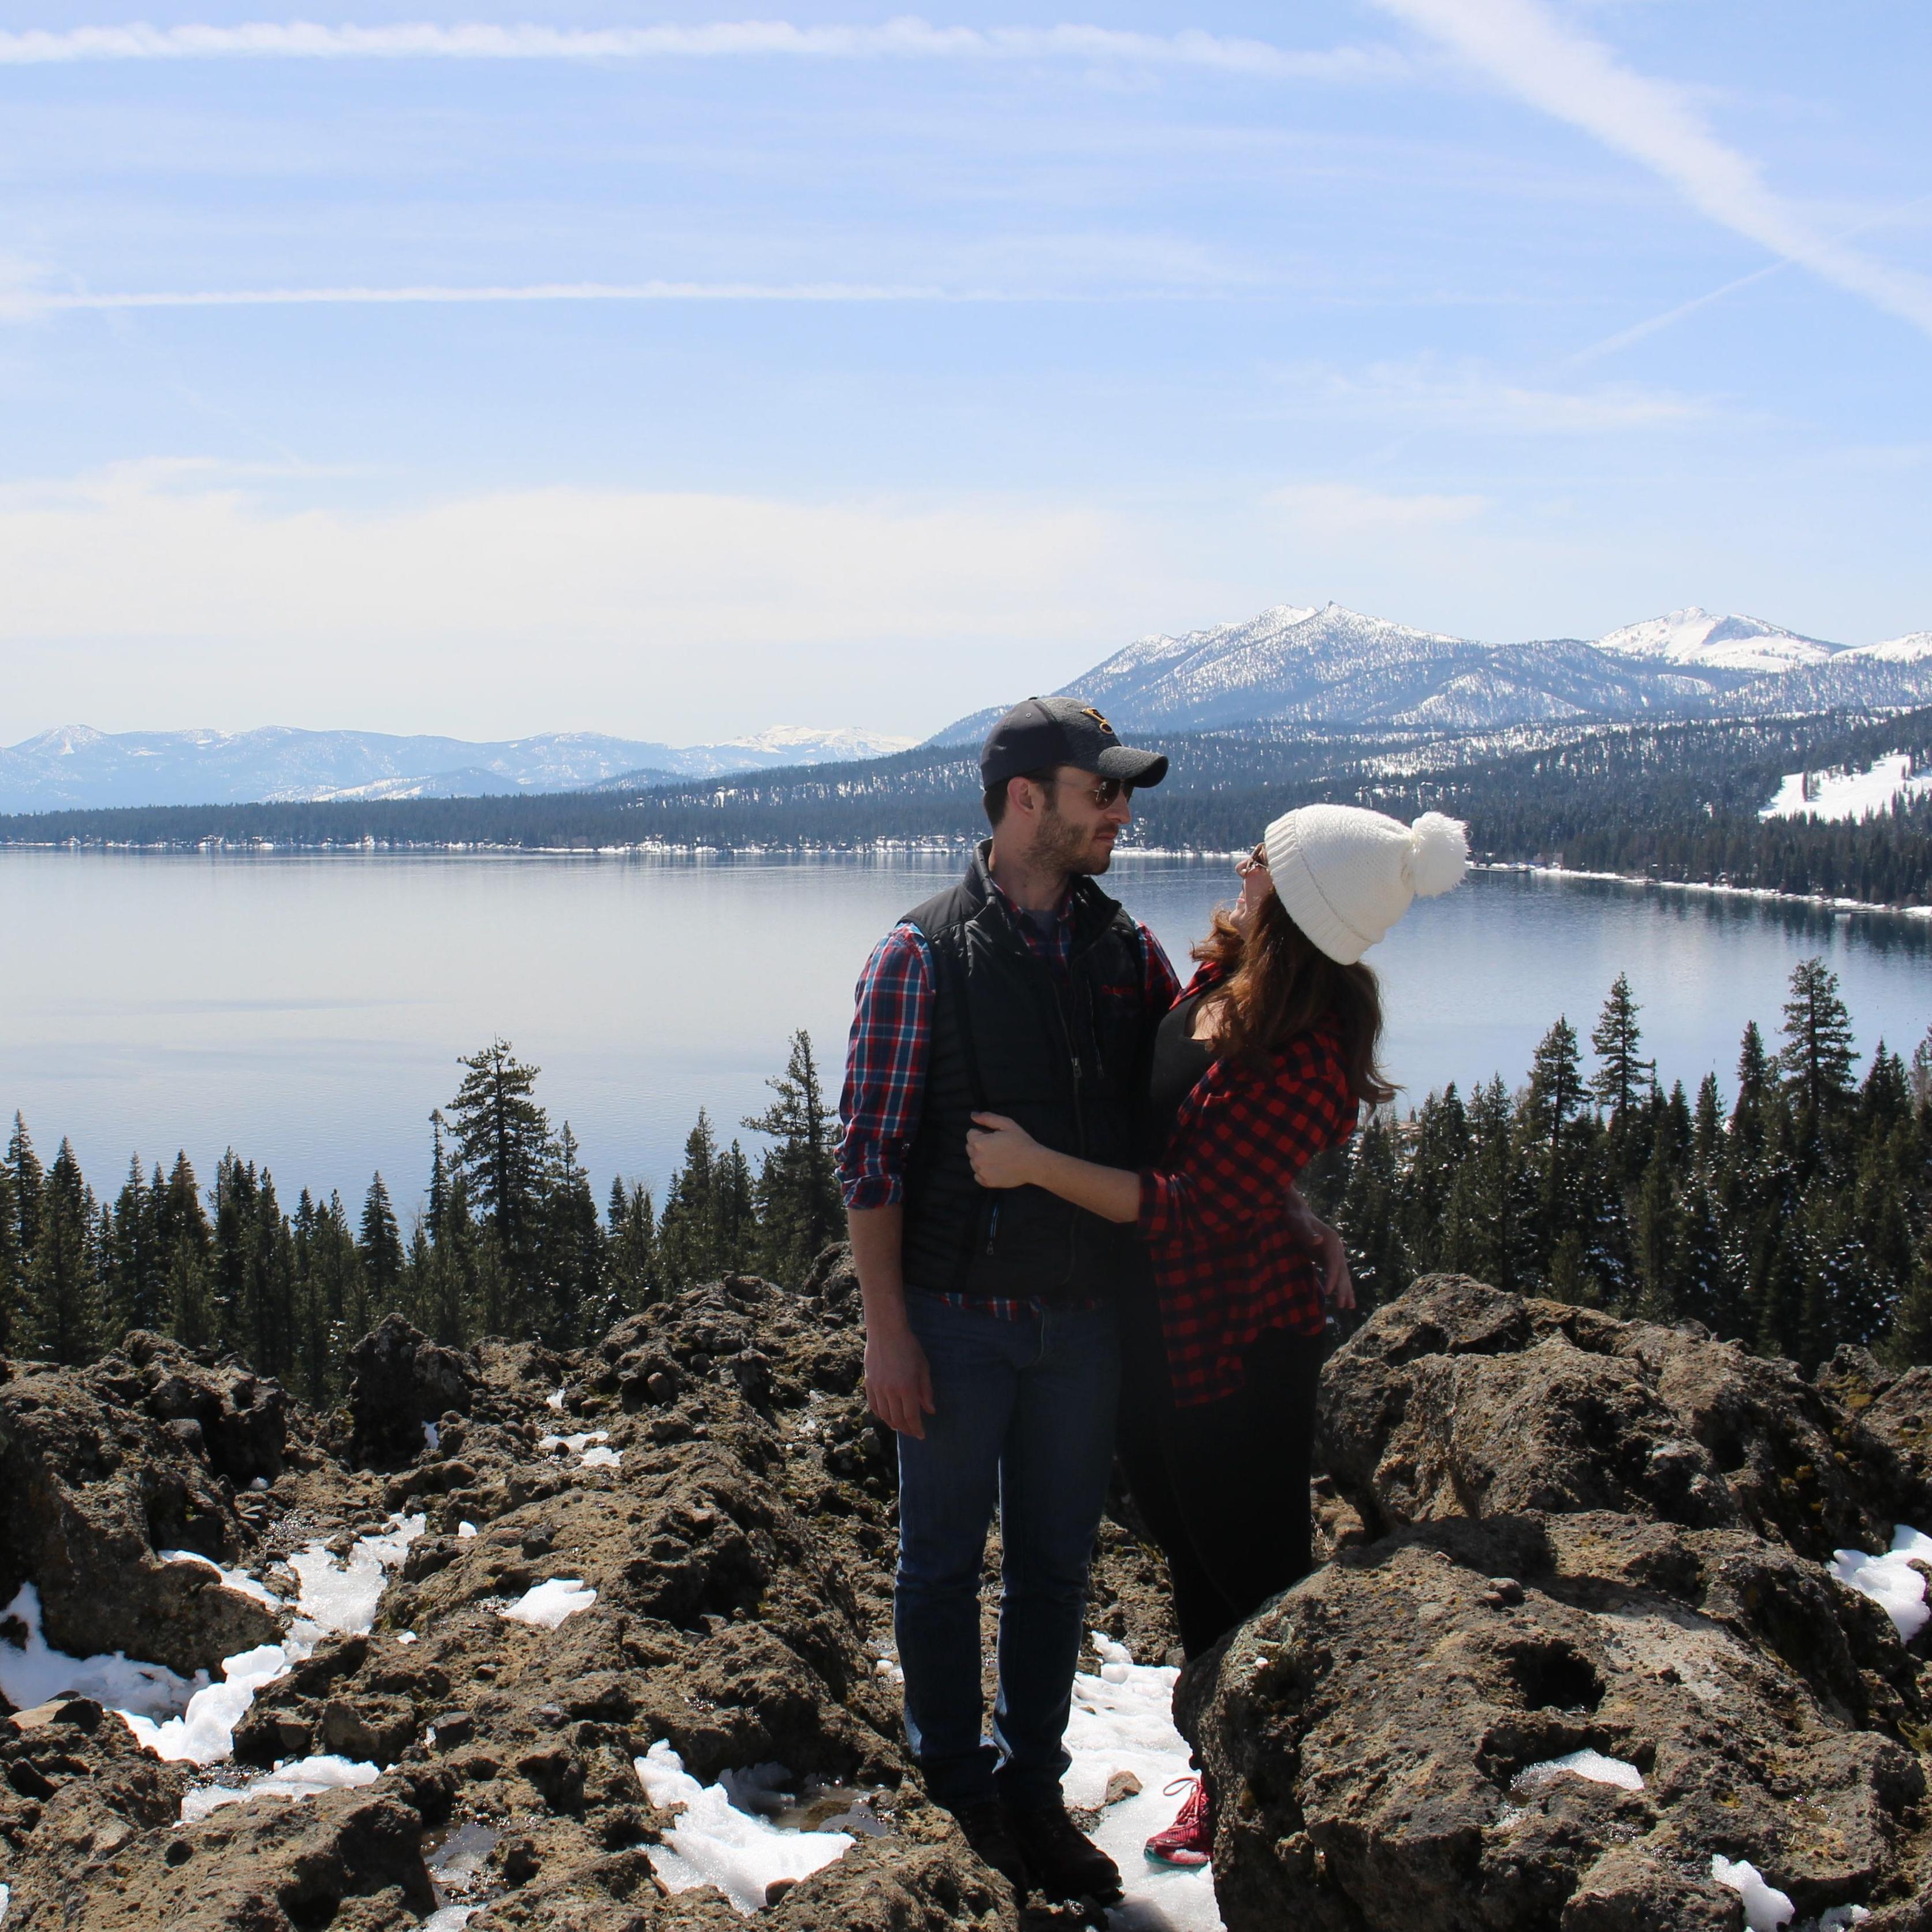 The weekend he auditioned and met my best friends at Lake Tahoe. Spoiler alert, they loved him.